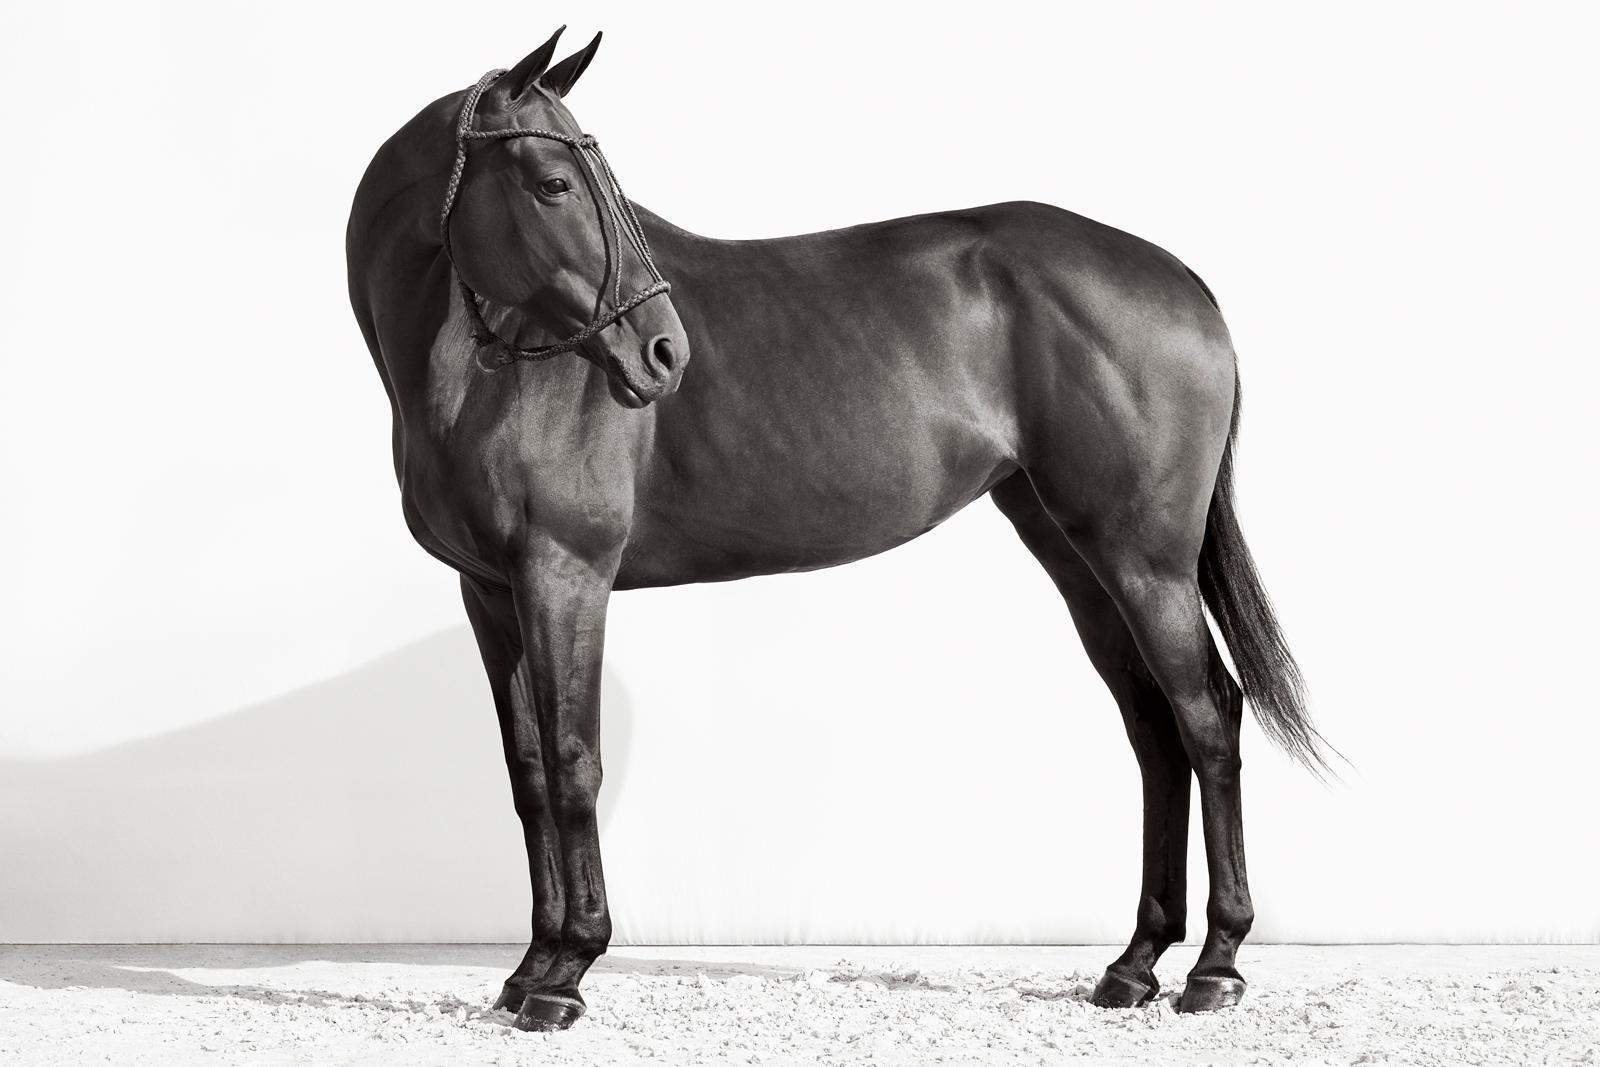 Drew Doggett Black and White Photograph - A full body portrait of a dark horse with an Argentinian halter